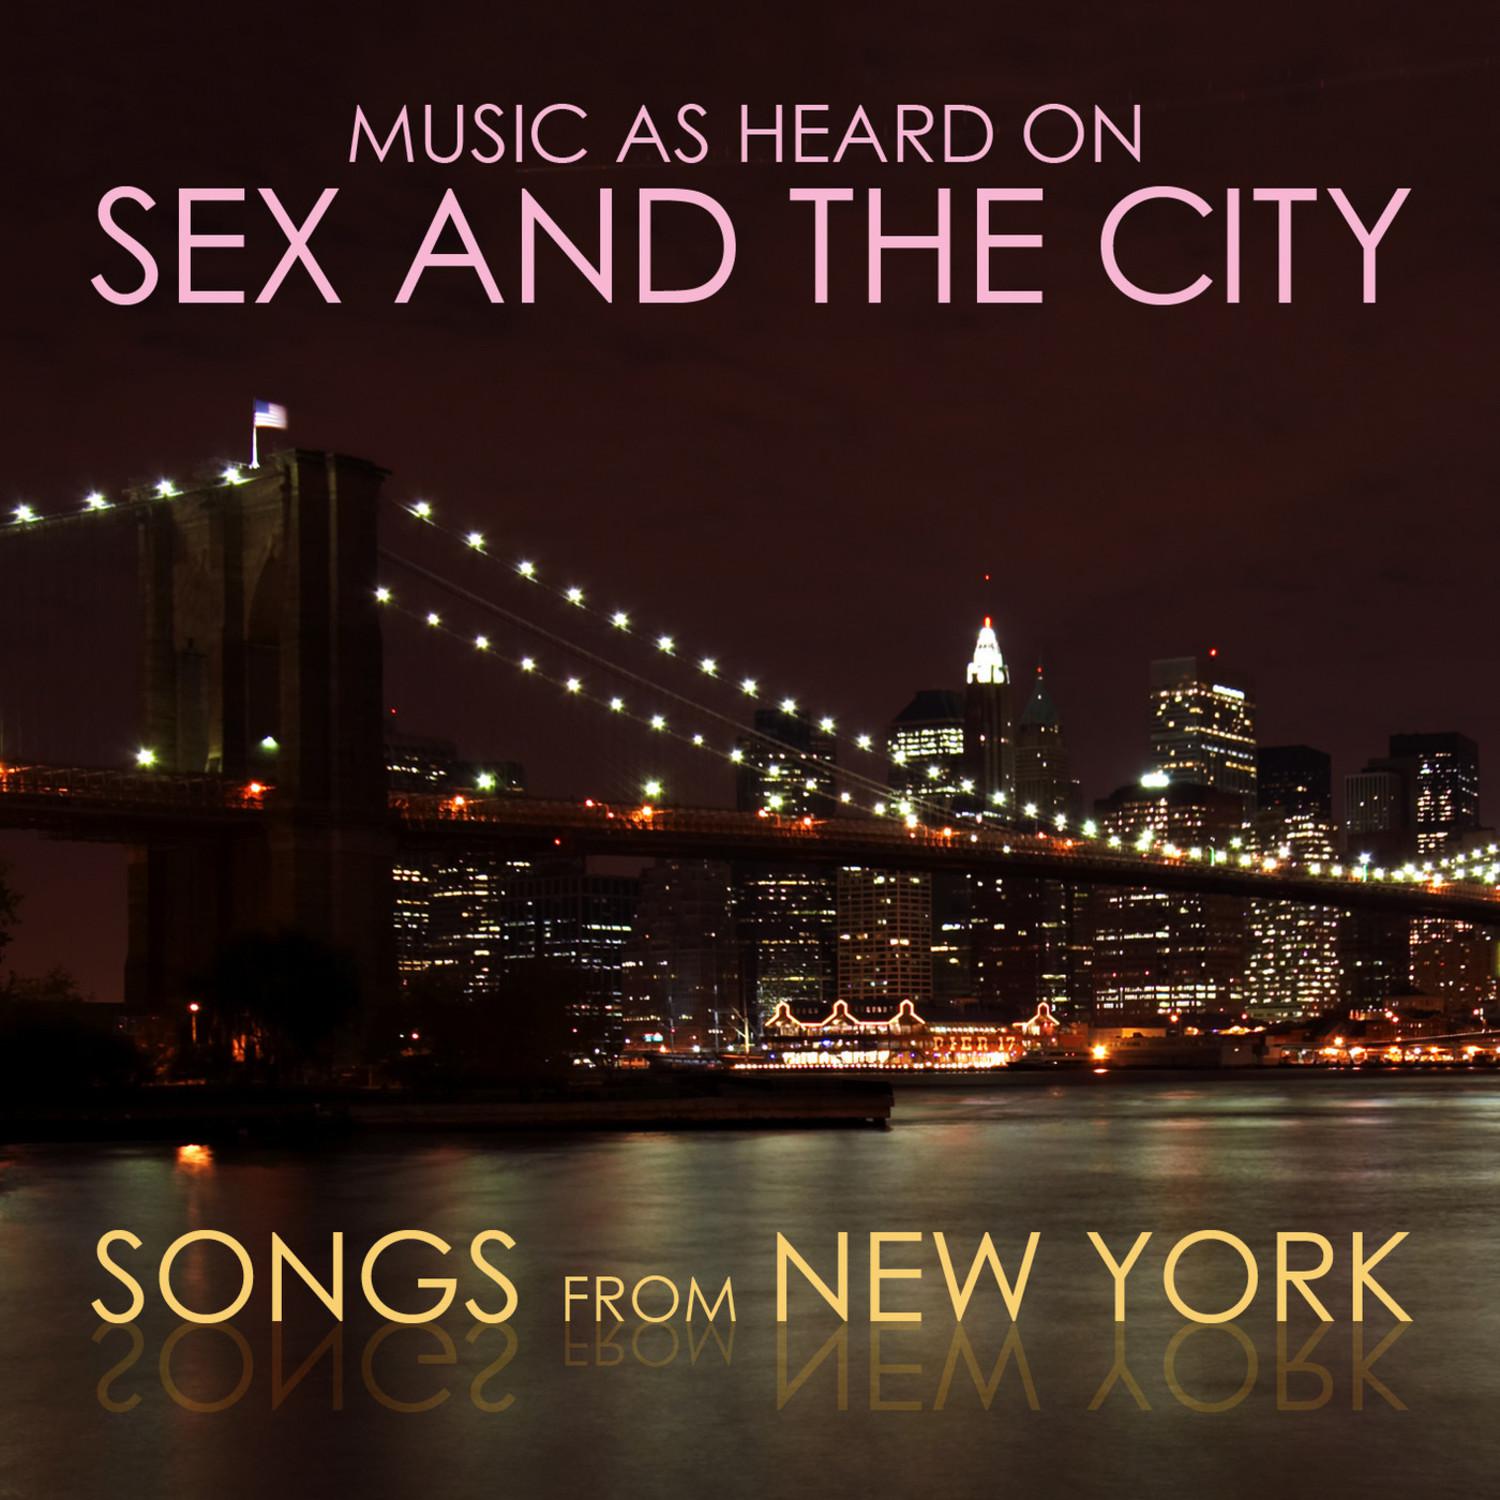 Songs From New York - Music as Heard on *** And The City